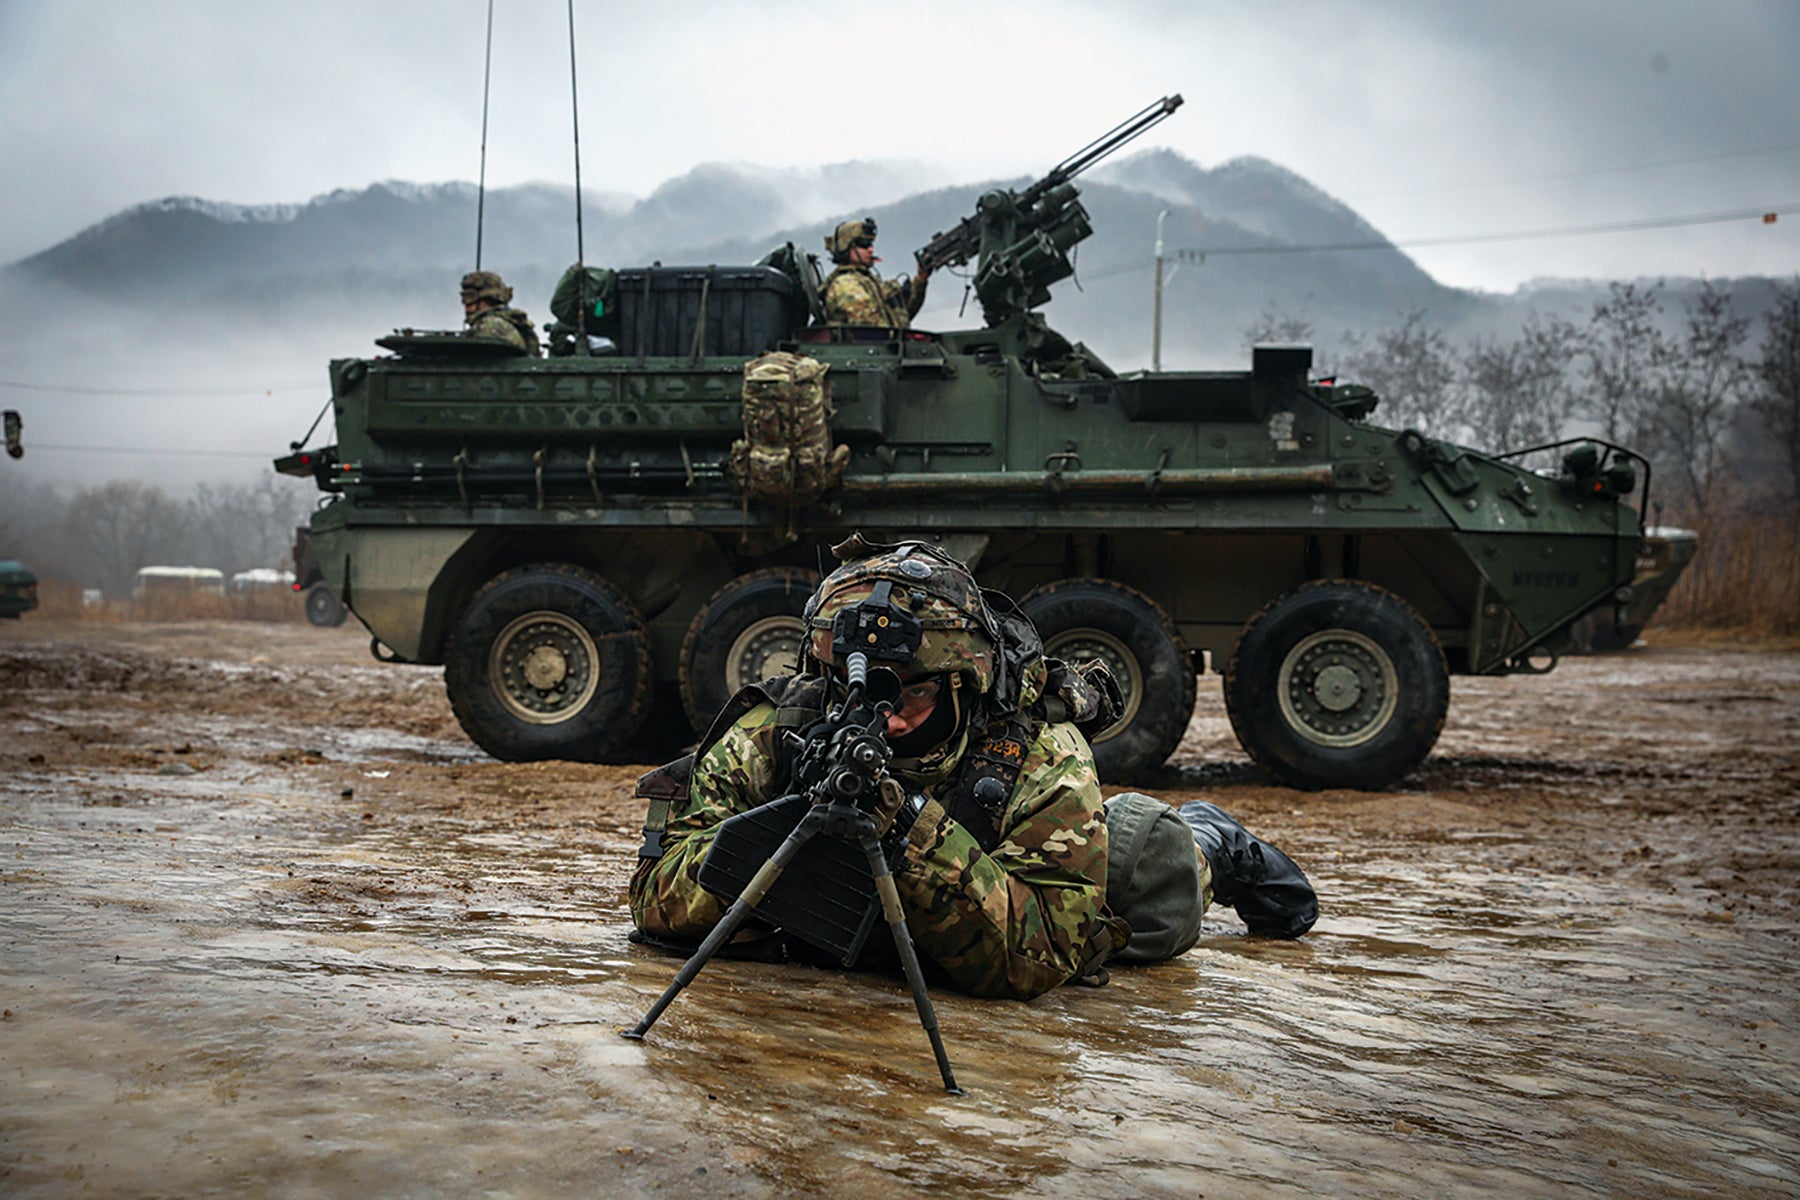 A squad automatic weapon gunner with the 2nd Stryker Brigade Combat Team, 2nd Infantry Division, pulls security at South Korea’s Twin Bridges Training Area. (Credit: U.S. Army/Sgt. Jerod Hathaway)